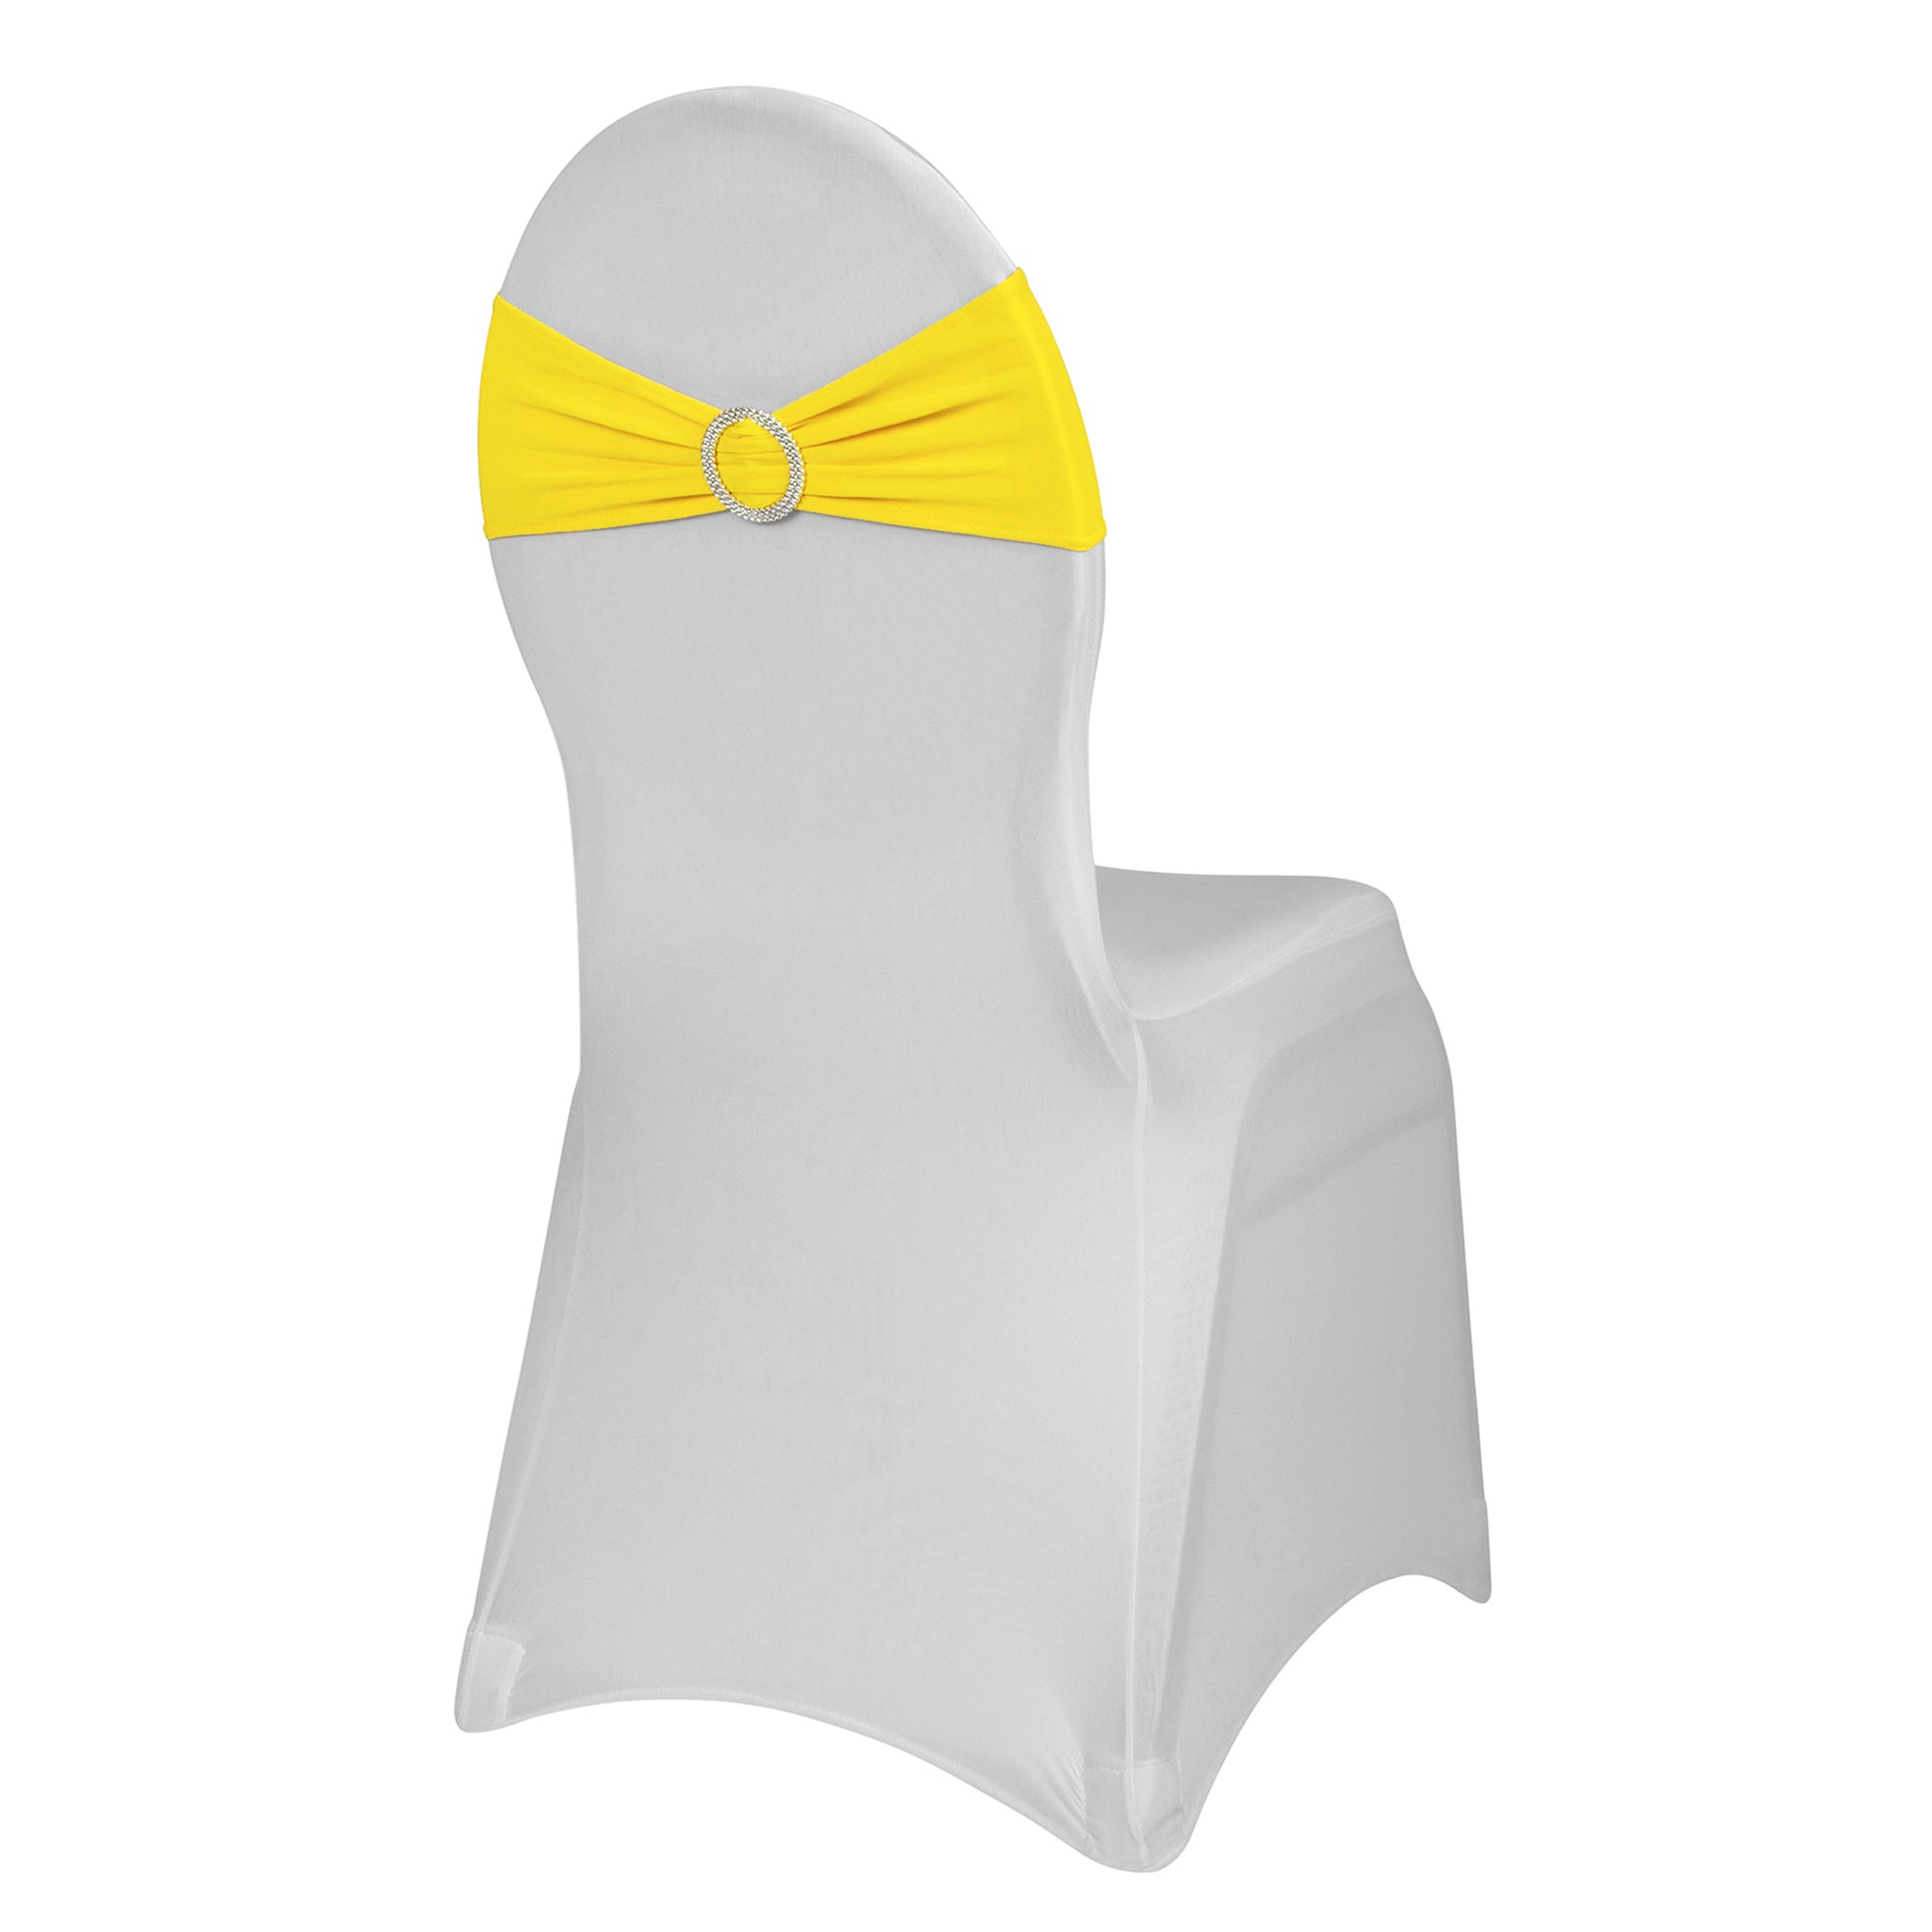 Buckle Spandex Stretch Chair Band - Bright Yellow